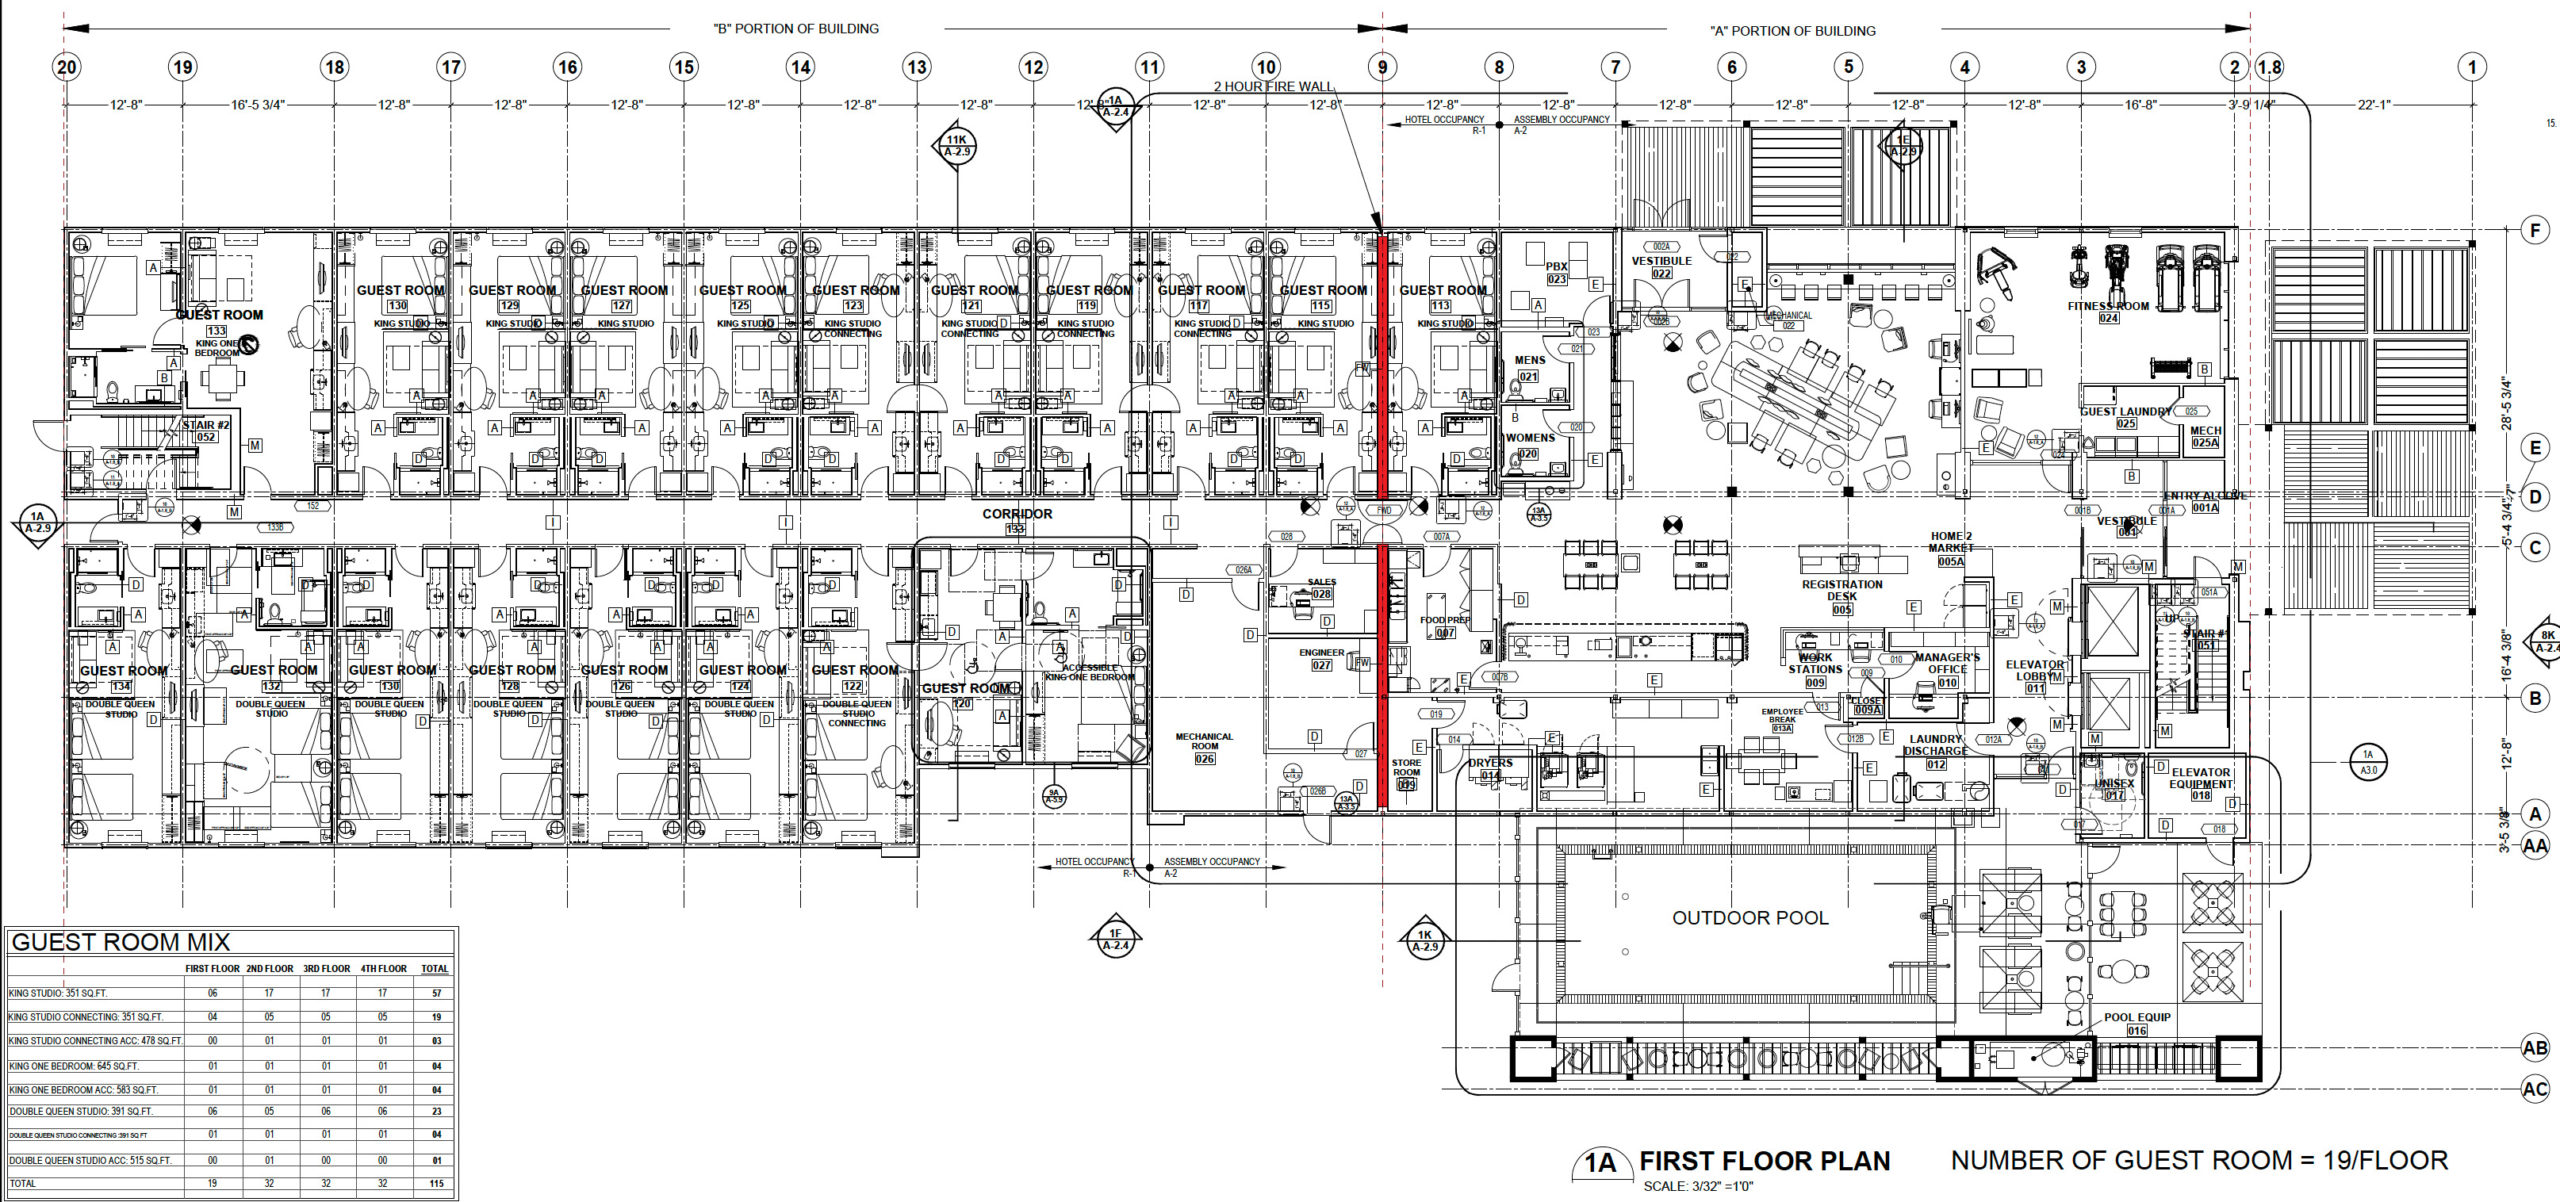 Home2 Suites by Hilton at 2112 Loveridge Road ground-level floor plan, illustration by I & A Architects